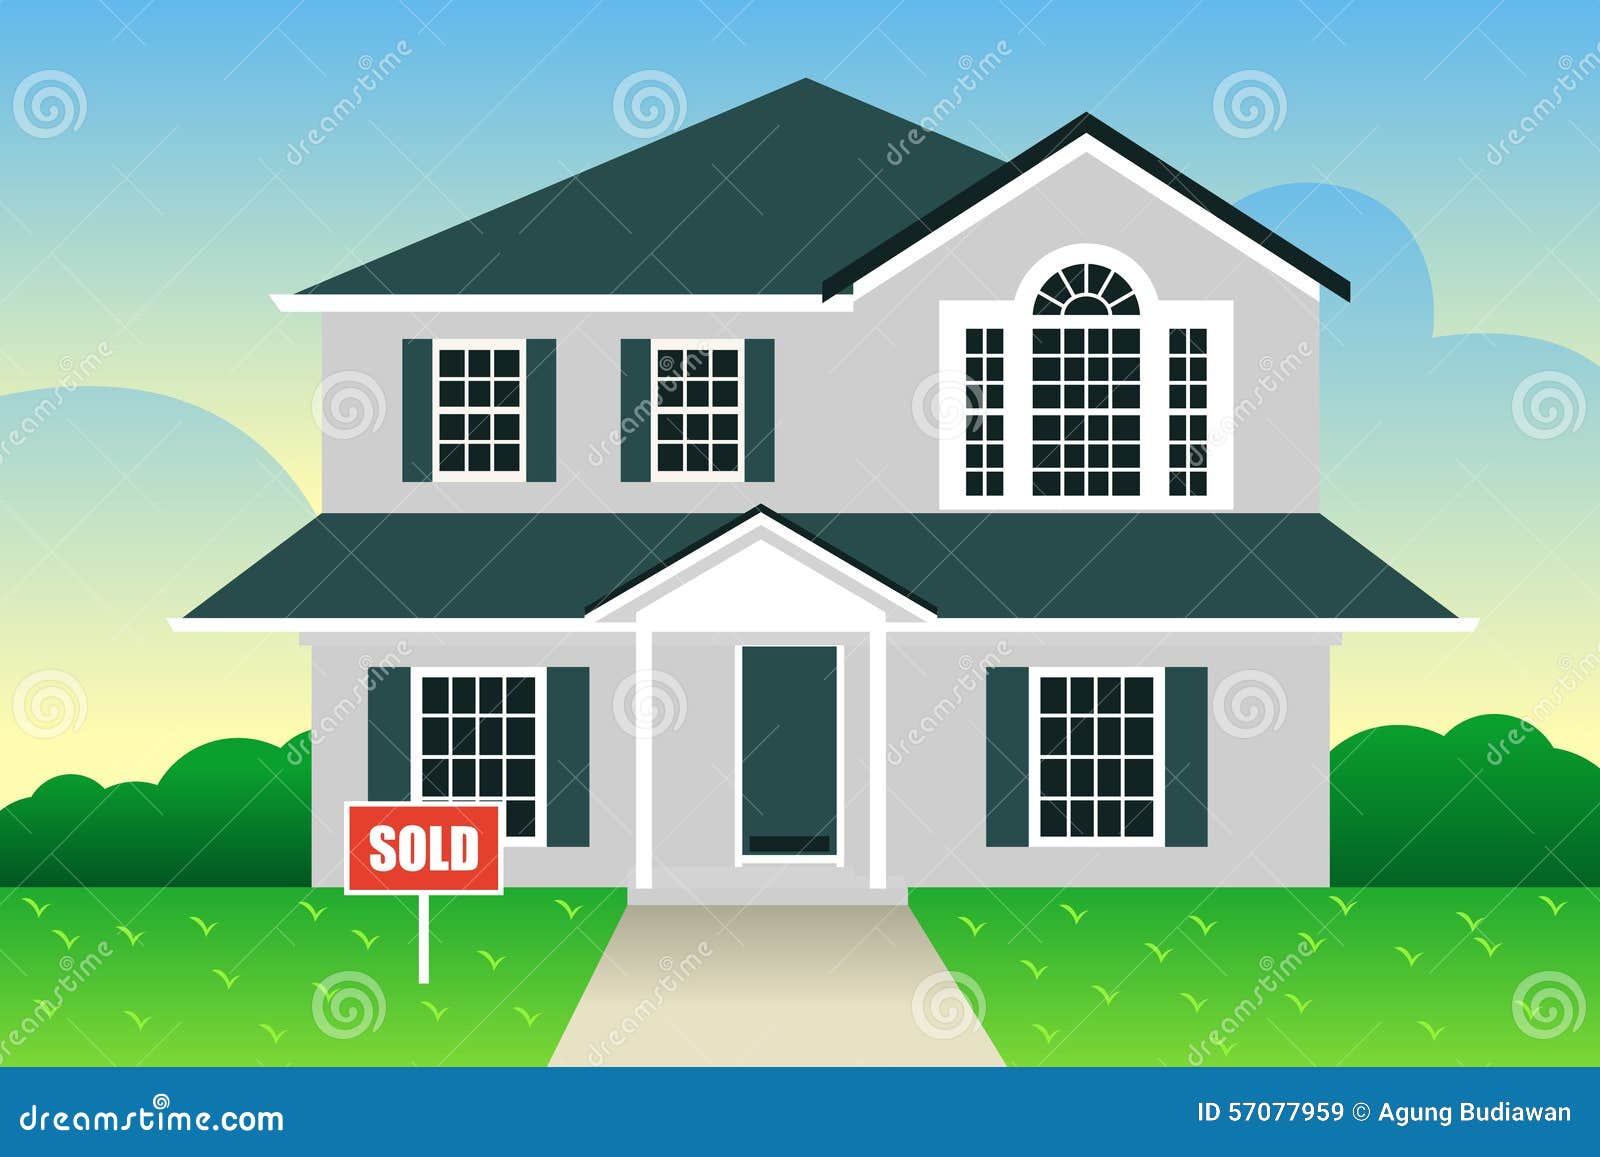 clipart houses for sale - photo #29